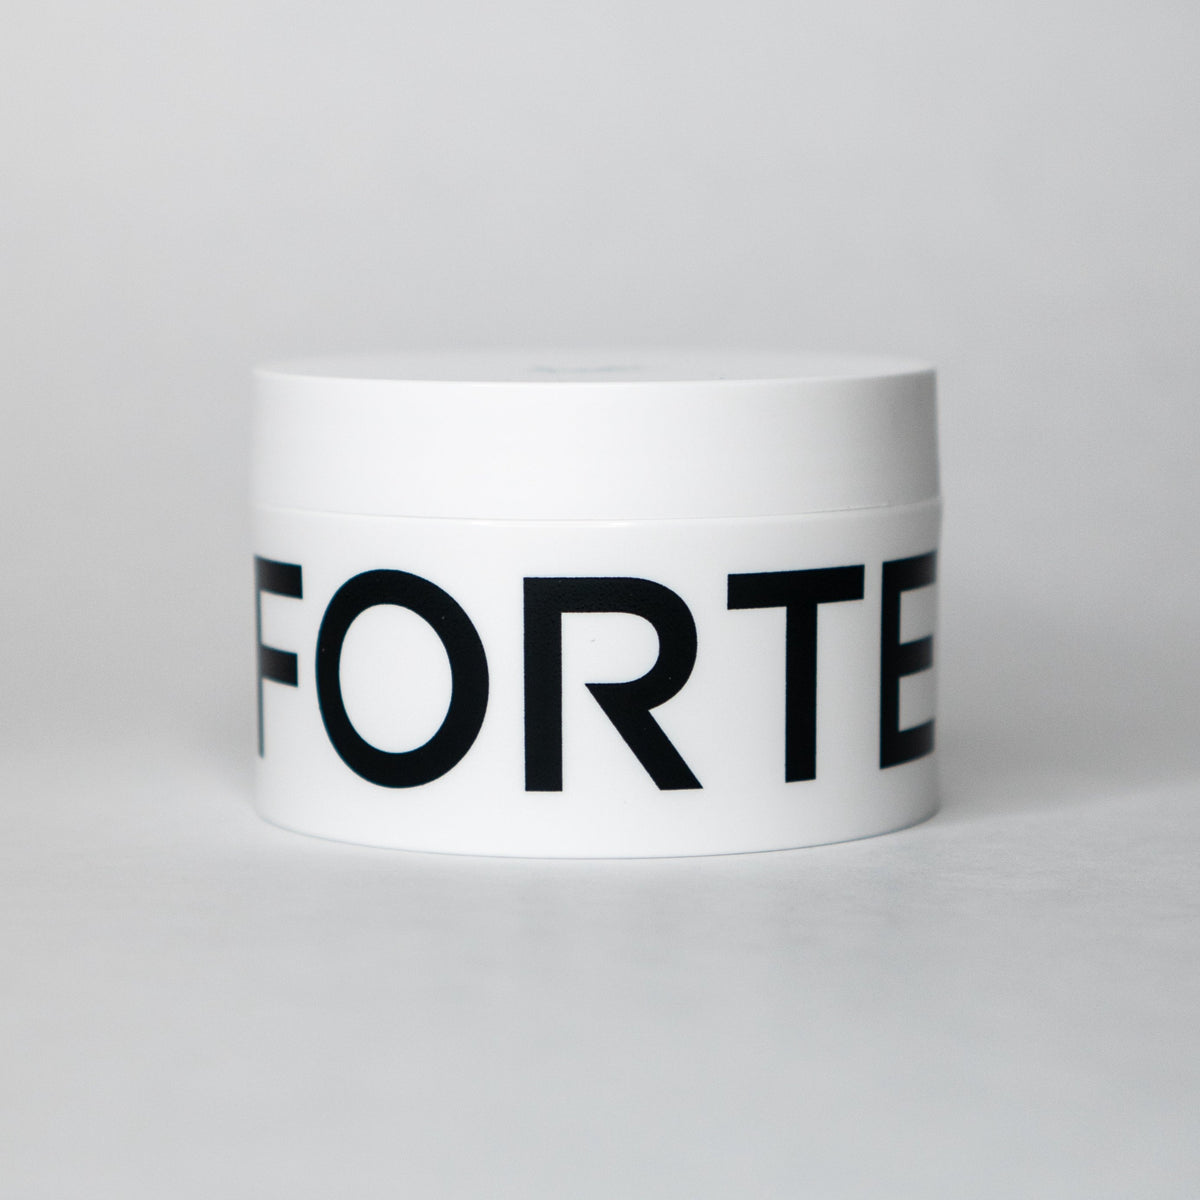 A jar of Forte Series Styling Cream by KirbyAllison.com with a satin finish.